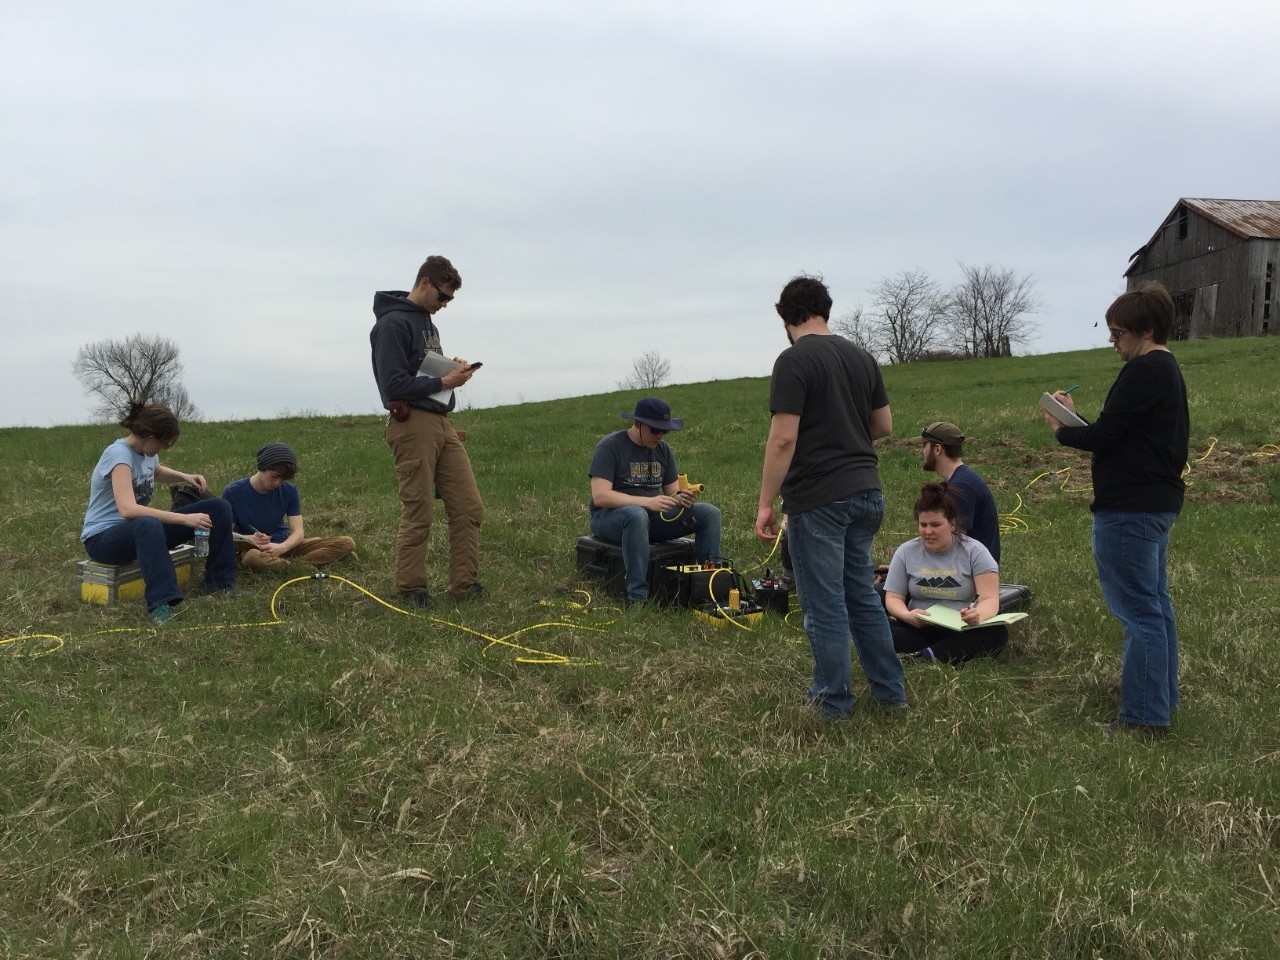 Students using geophysical equipment in a field